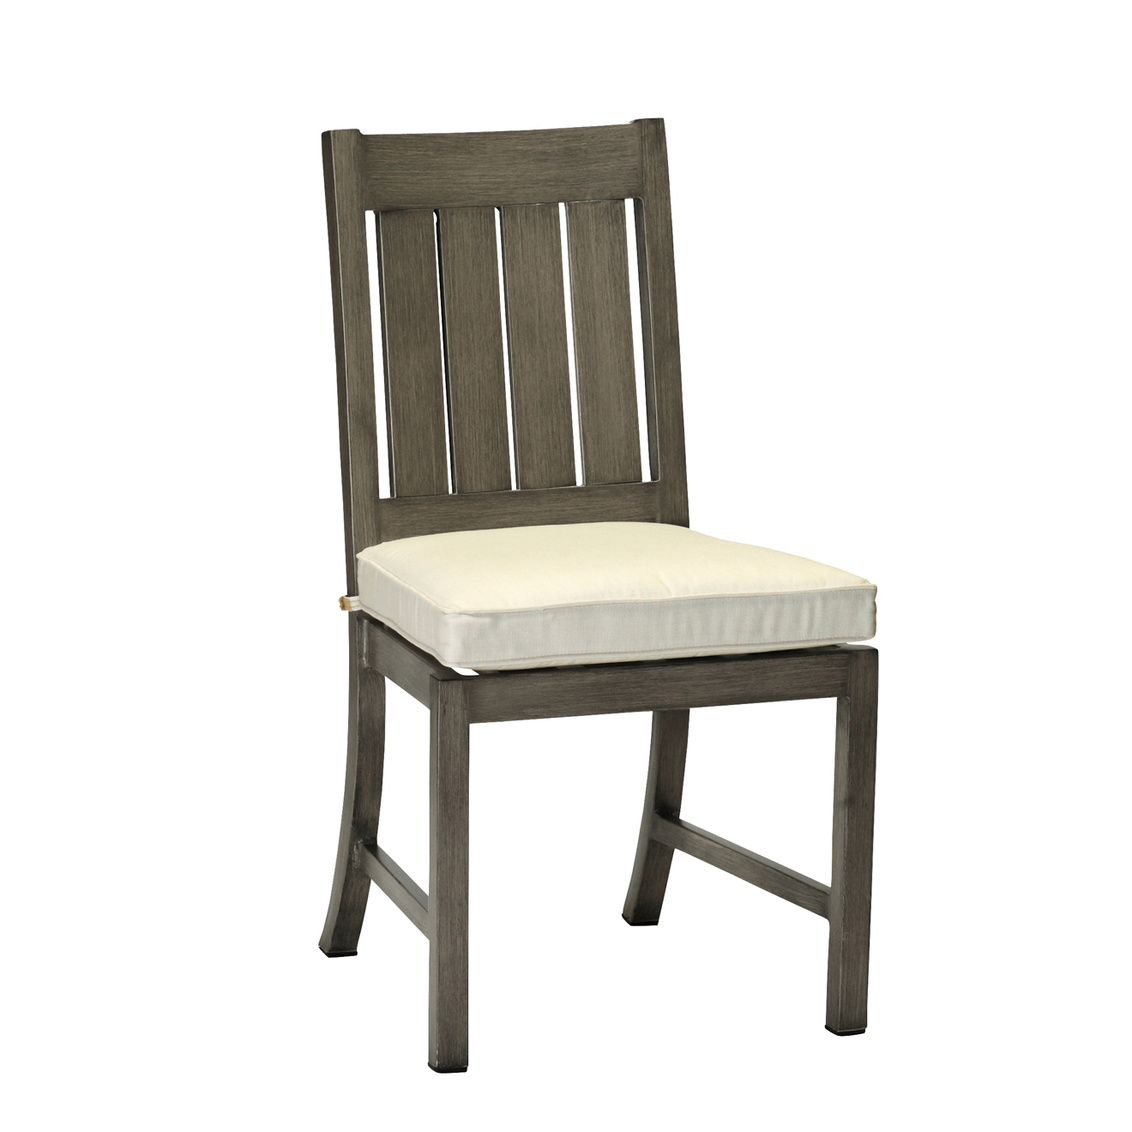 club/croquet aluminum side chair in slate grey – frame only product image